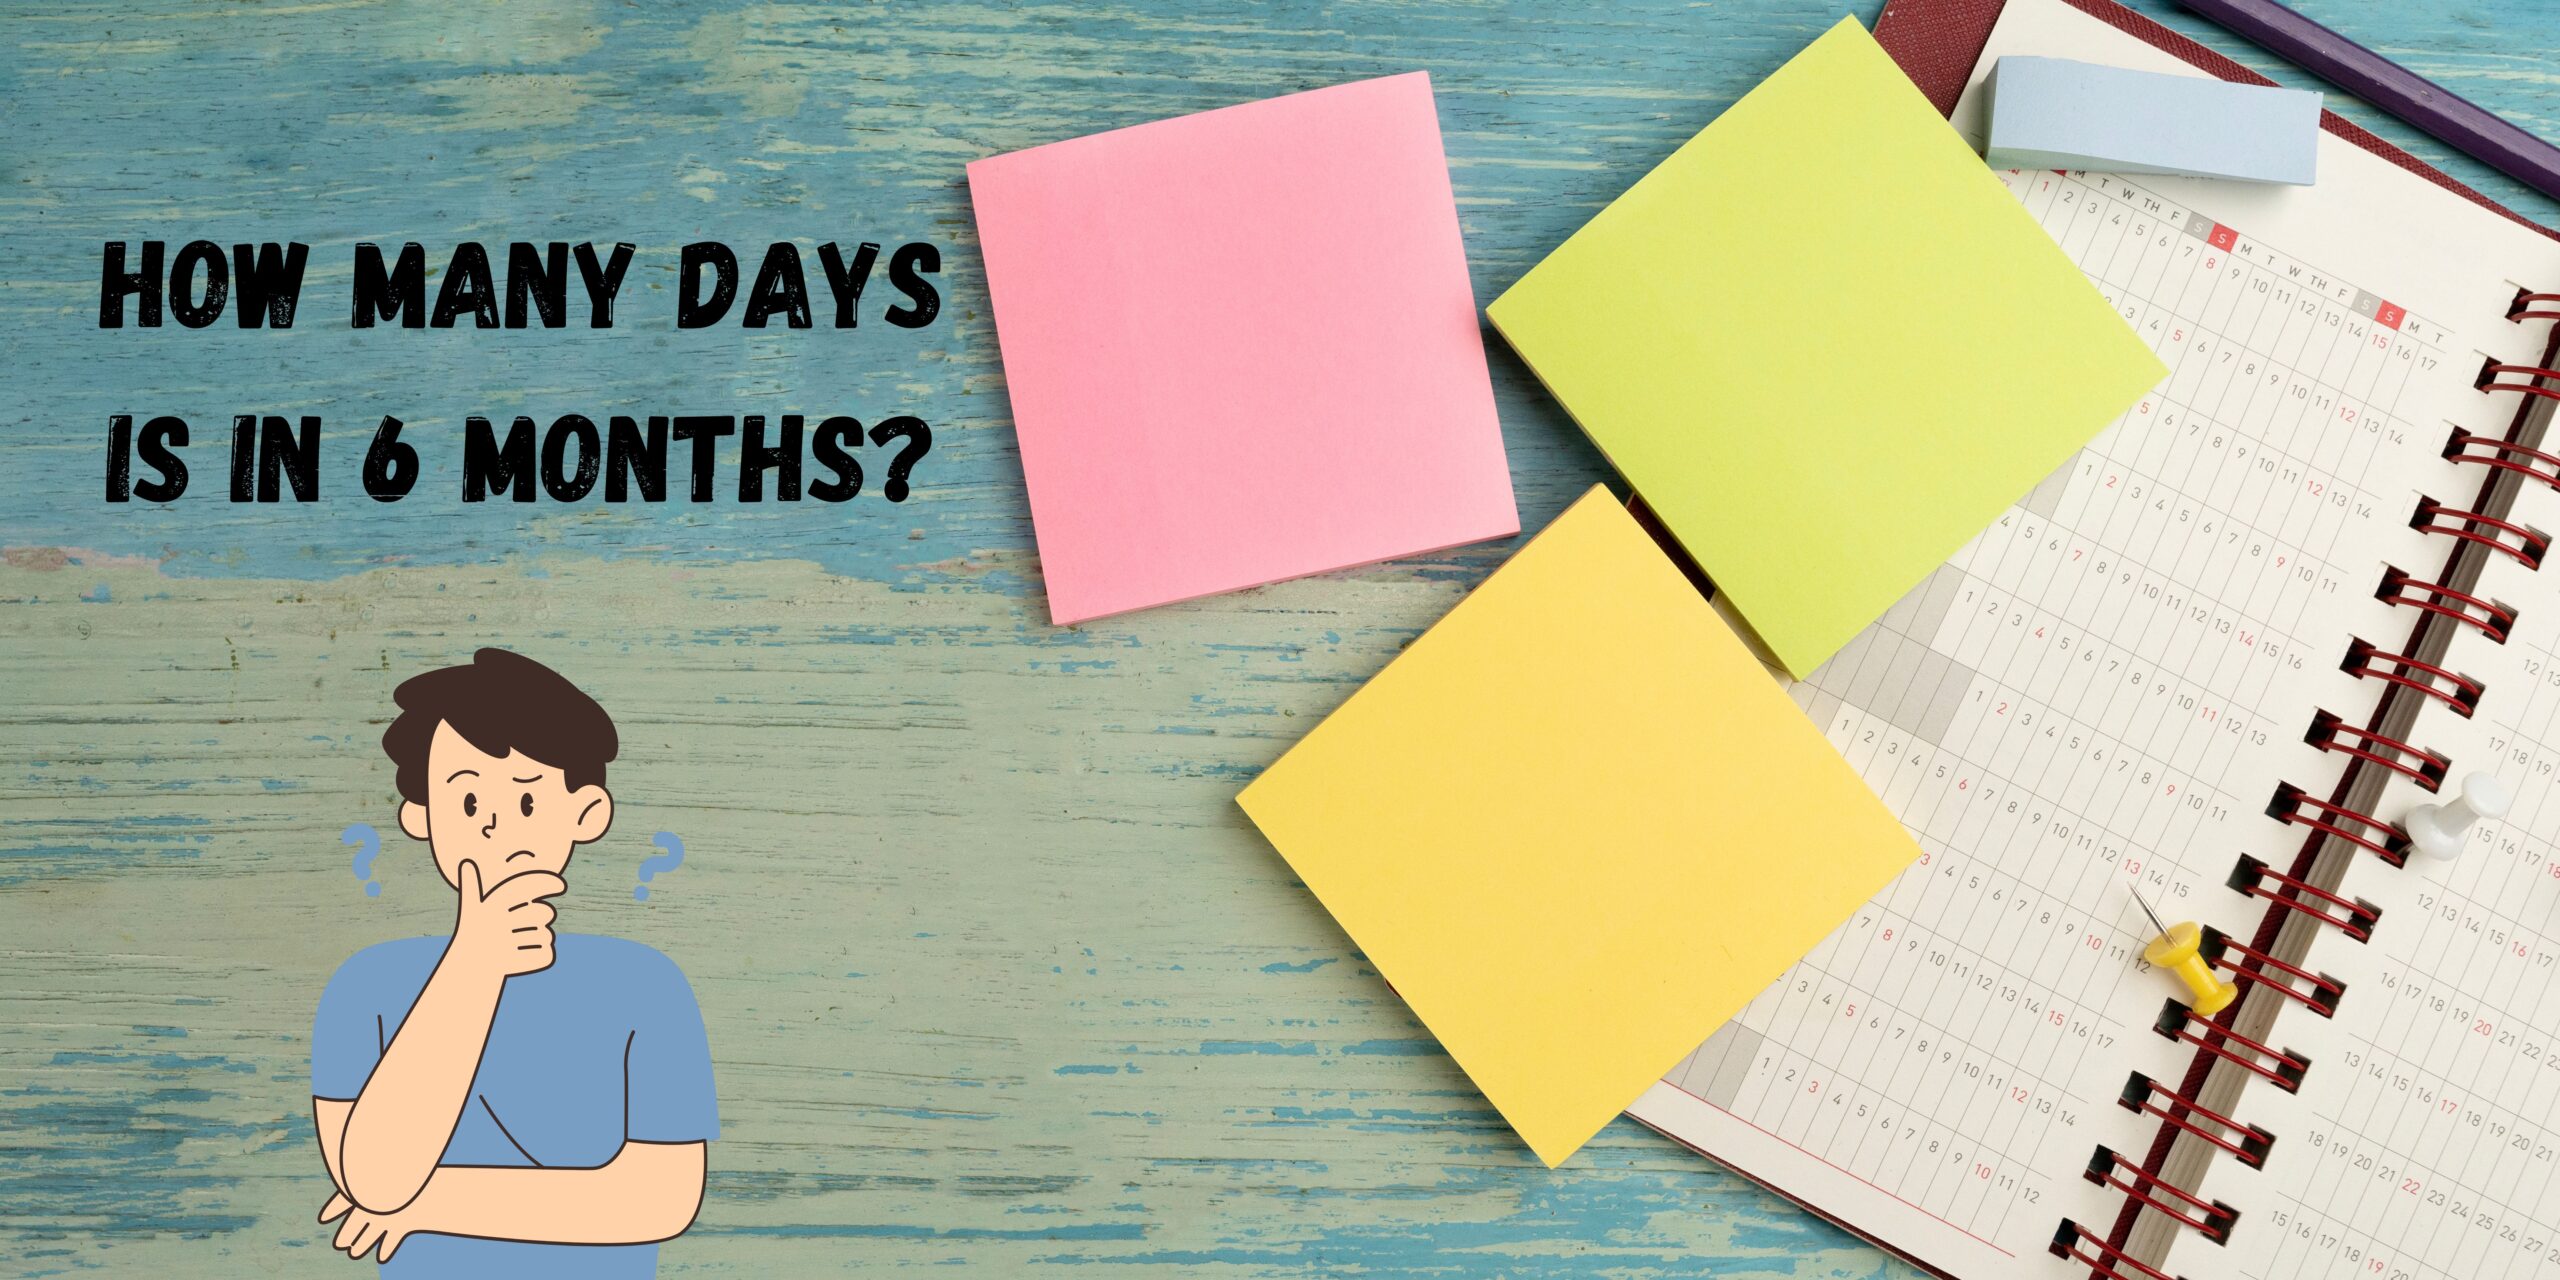 How Many Days is in 6 Months